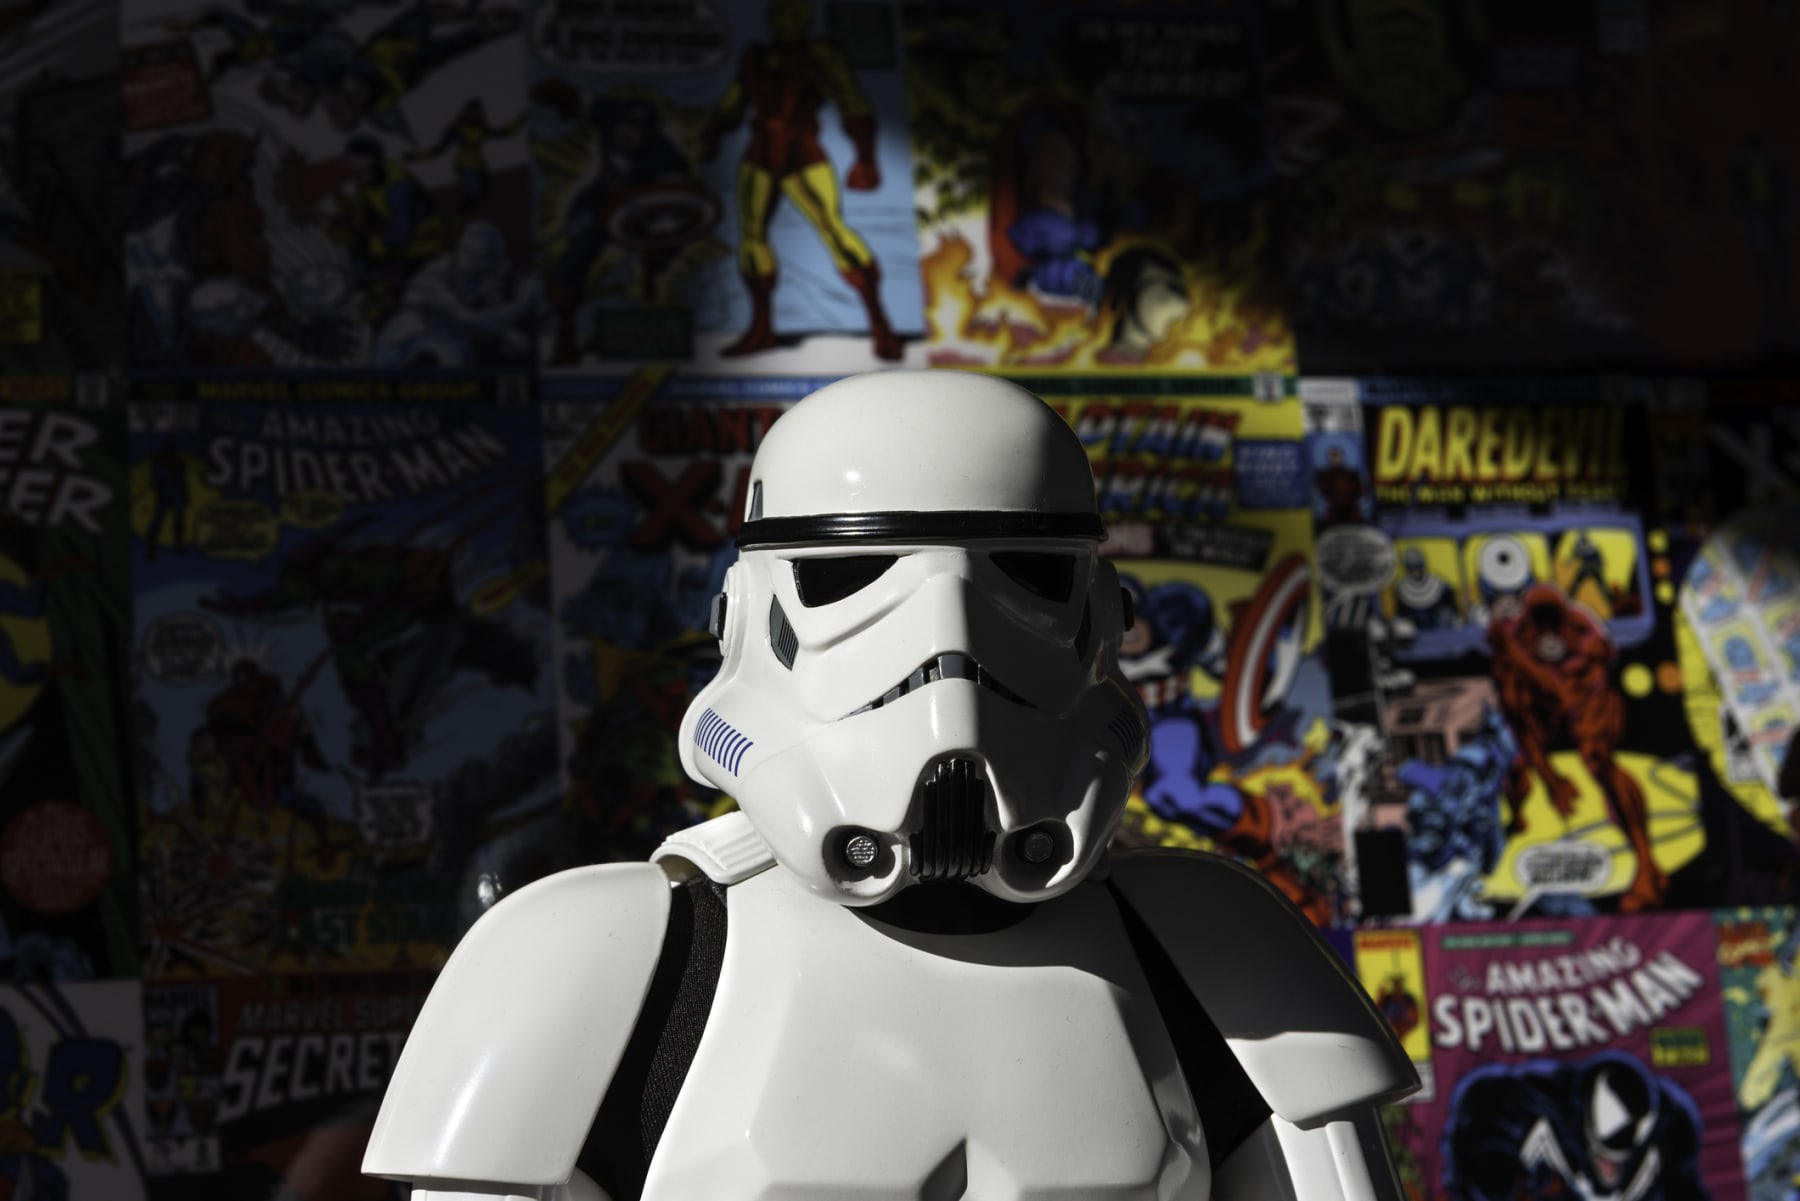 Star Wars Stormtrooper action figure stands in front of comic book wall.